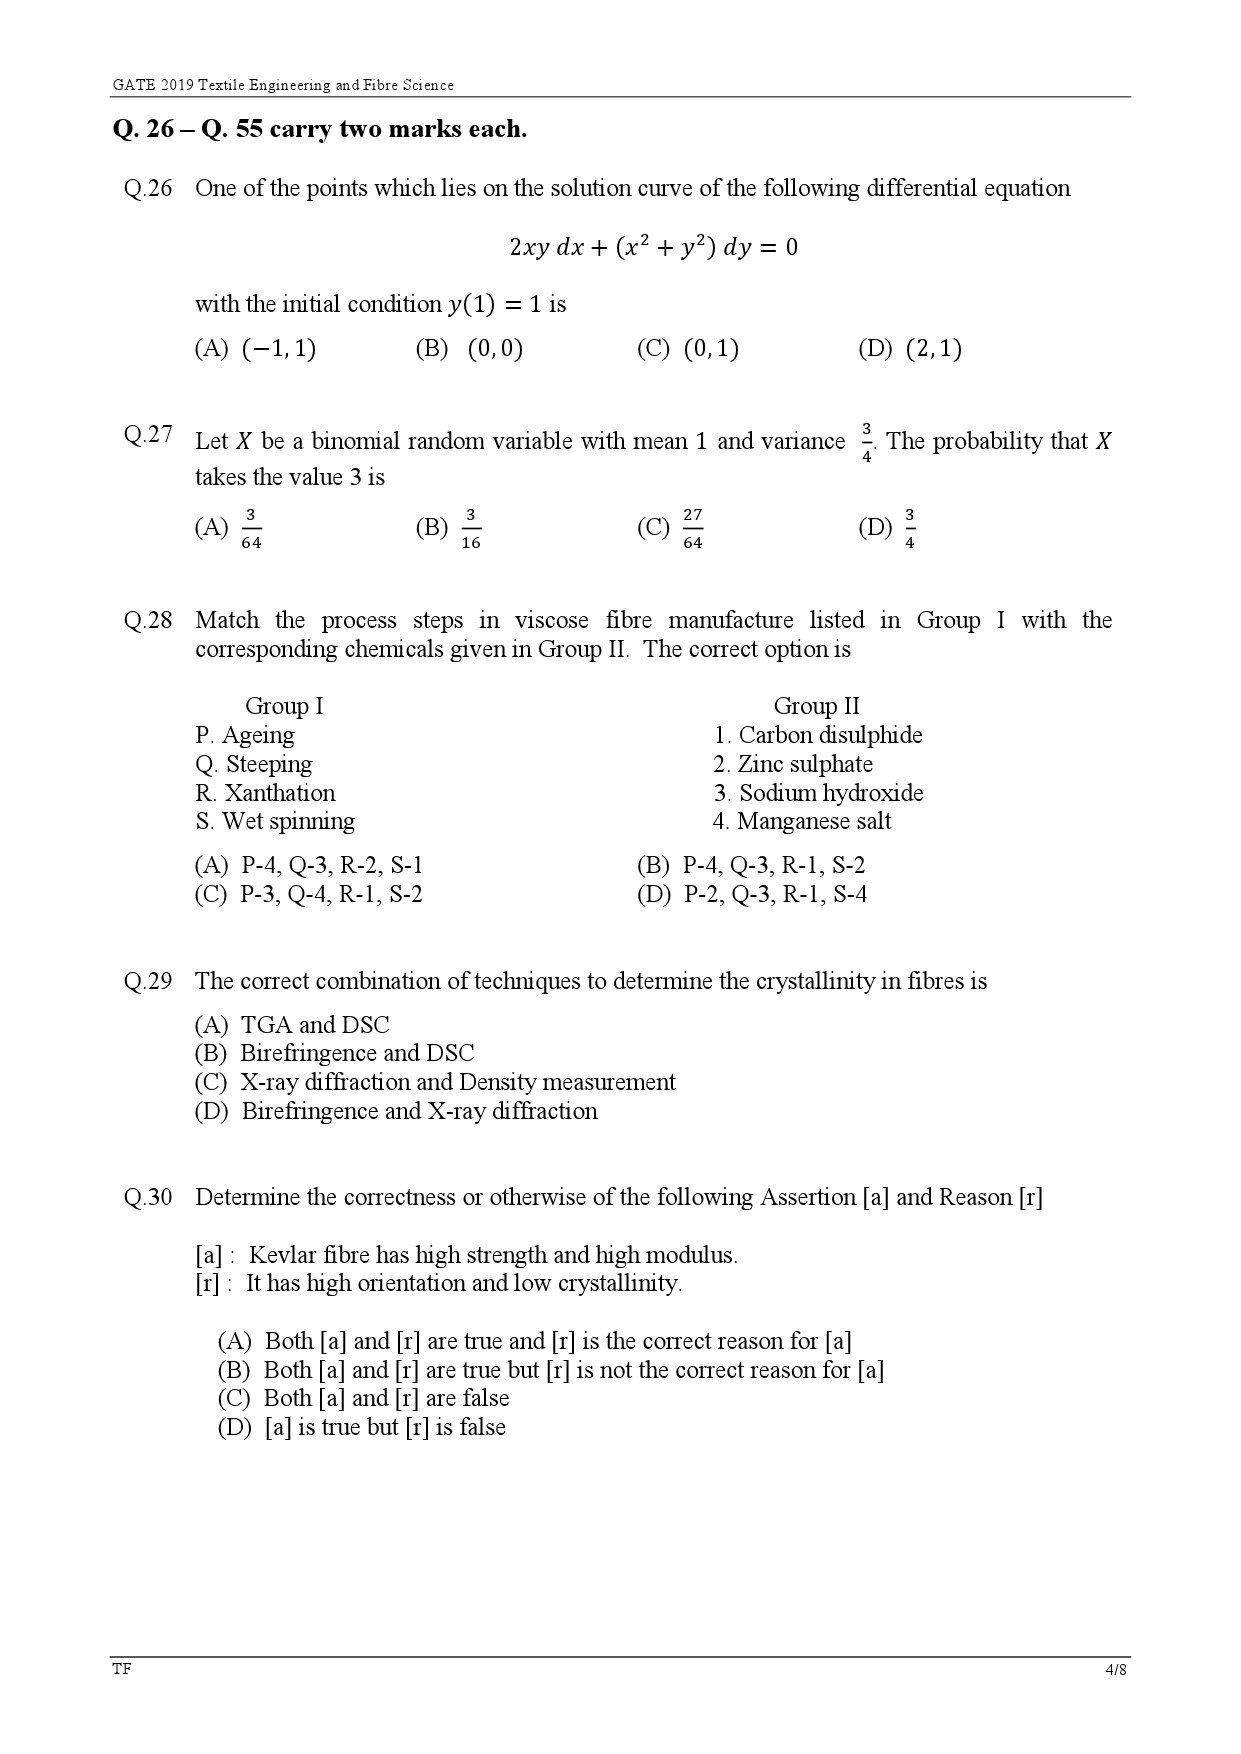 GATE Exam Question Paper 2019 Textile Engineering and Fibre Science 7